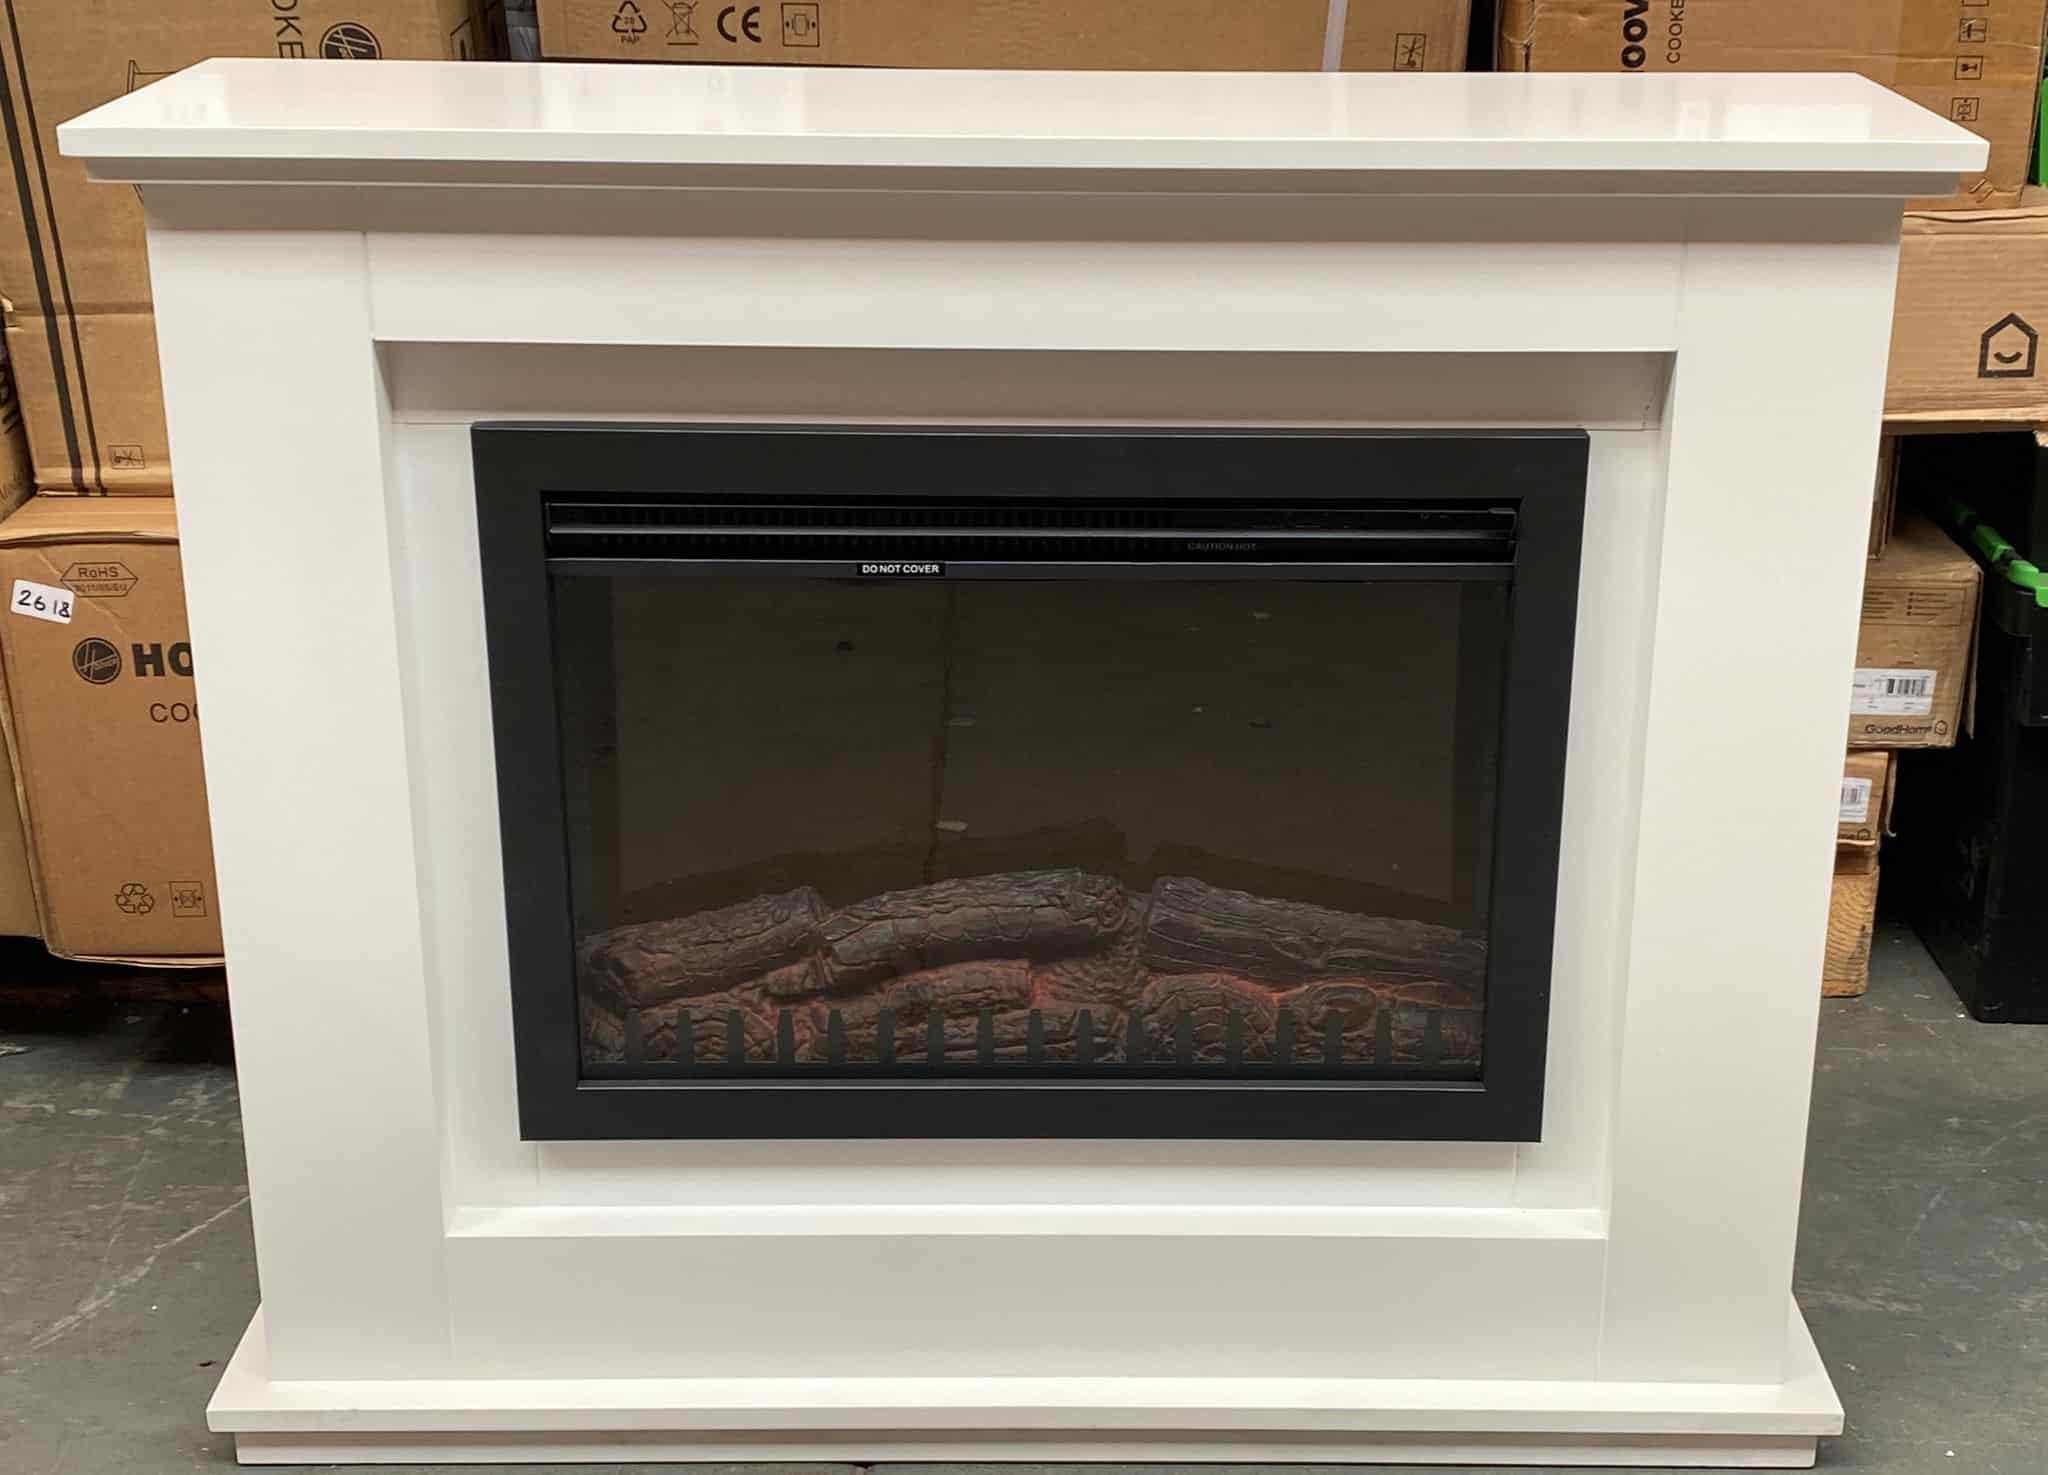 Focal Point Medford White Electric Fire suite 5277